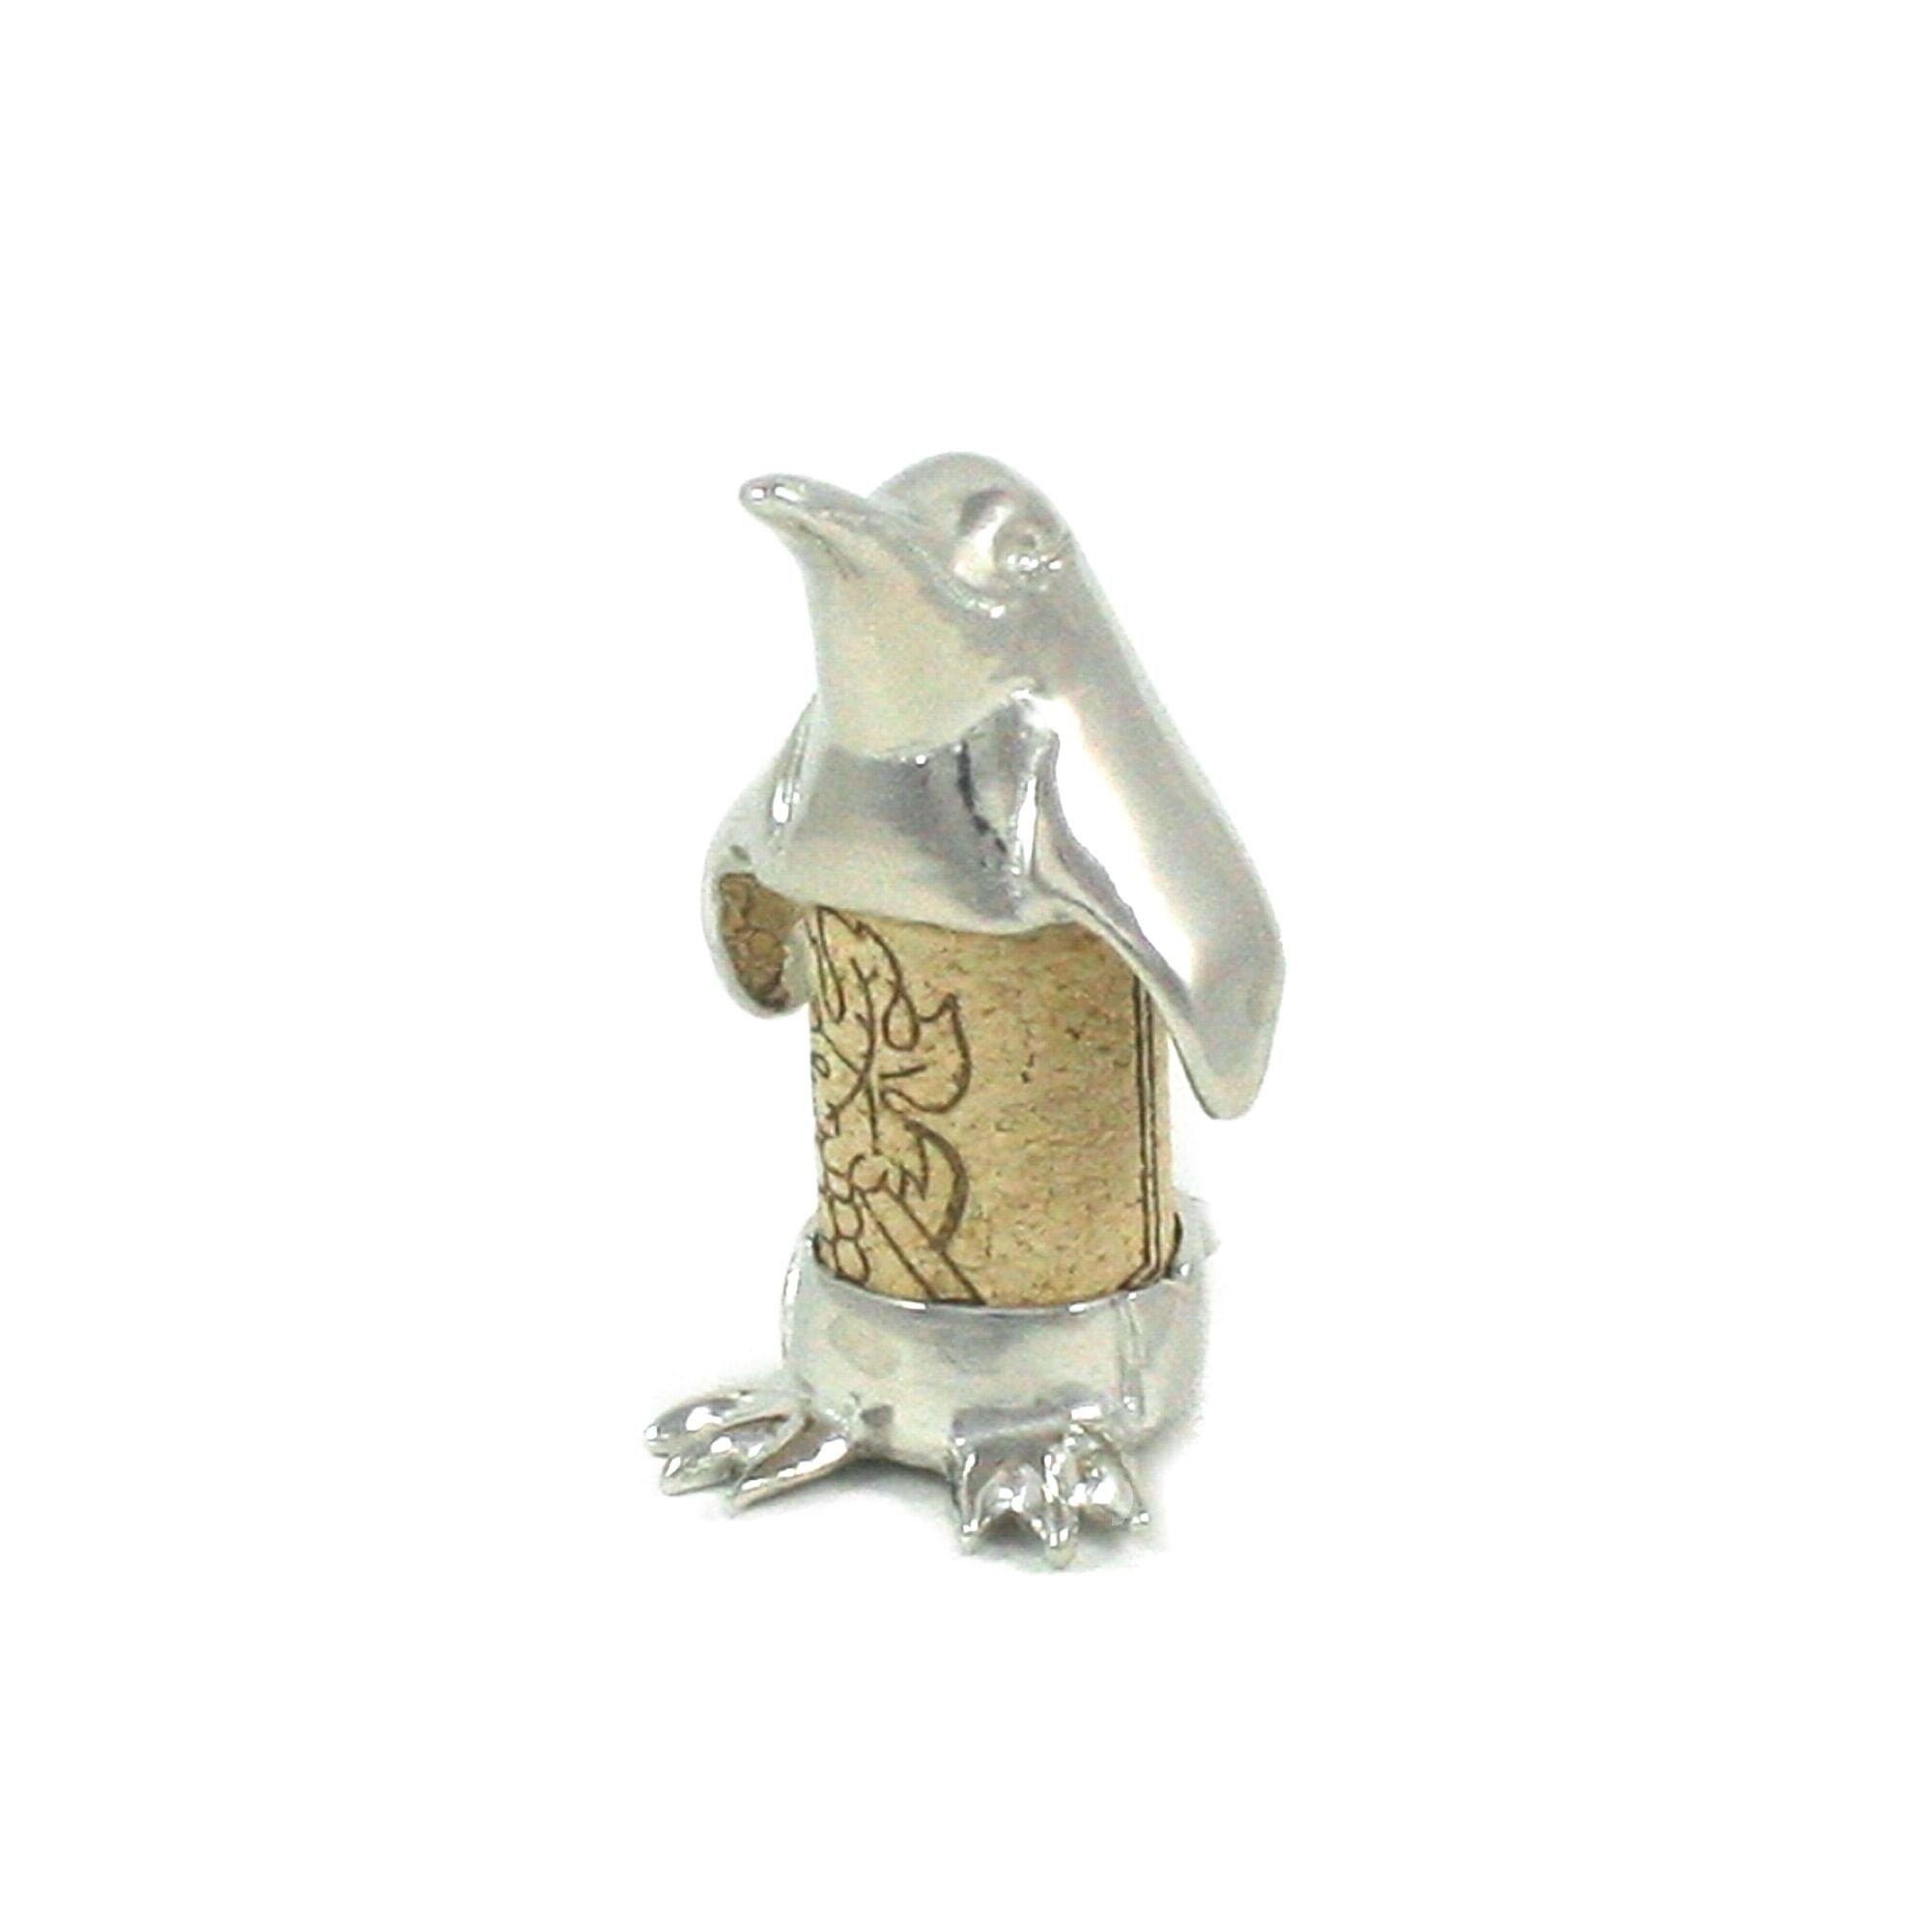 Handcrafted Pewter Made in USA Gift Boxed with Story Card Penguin Sculpture Displays Your Wine Cork 